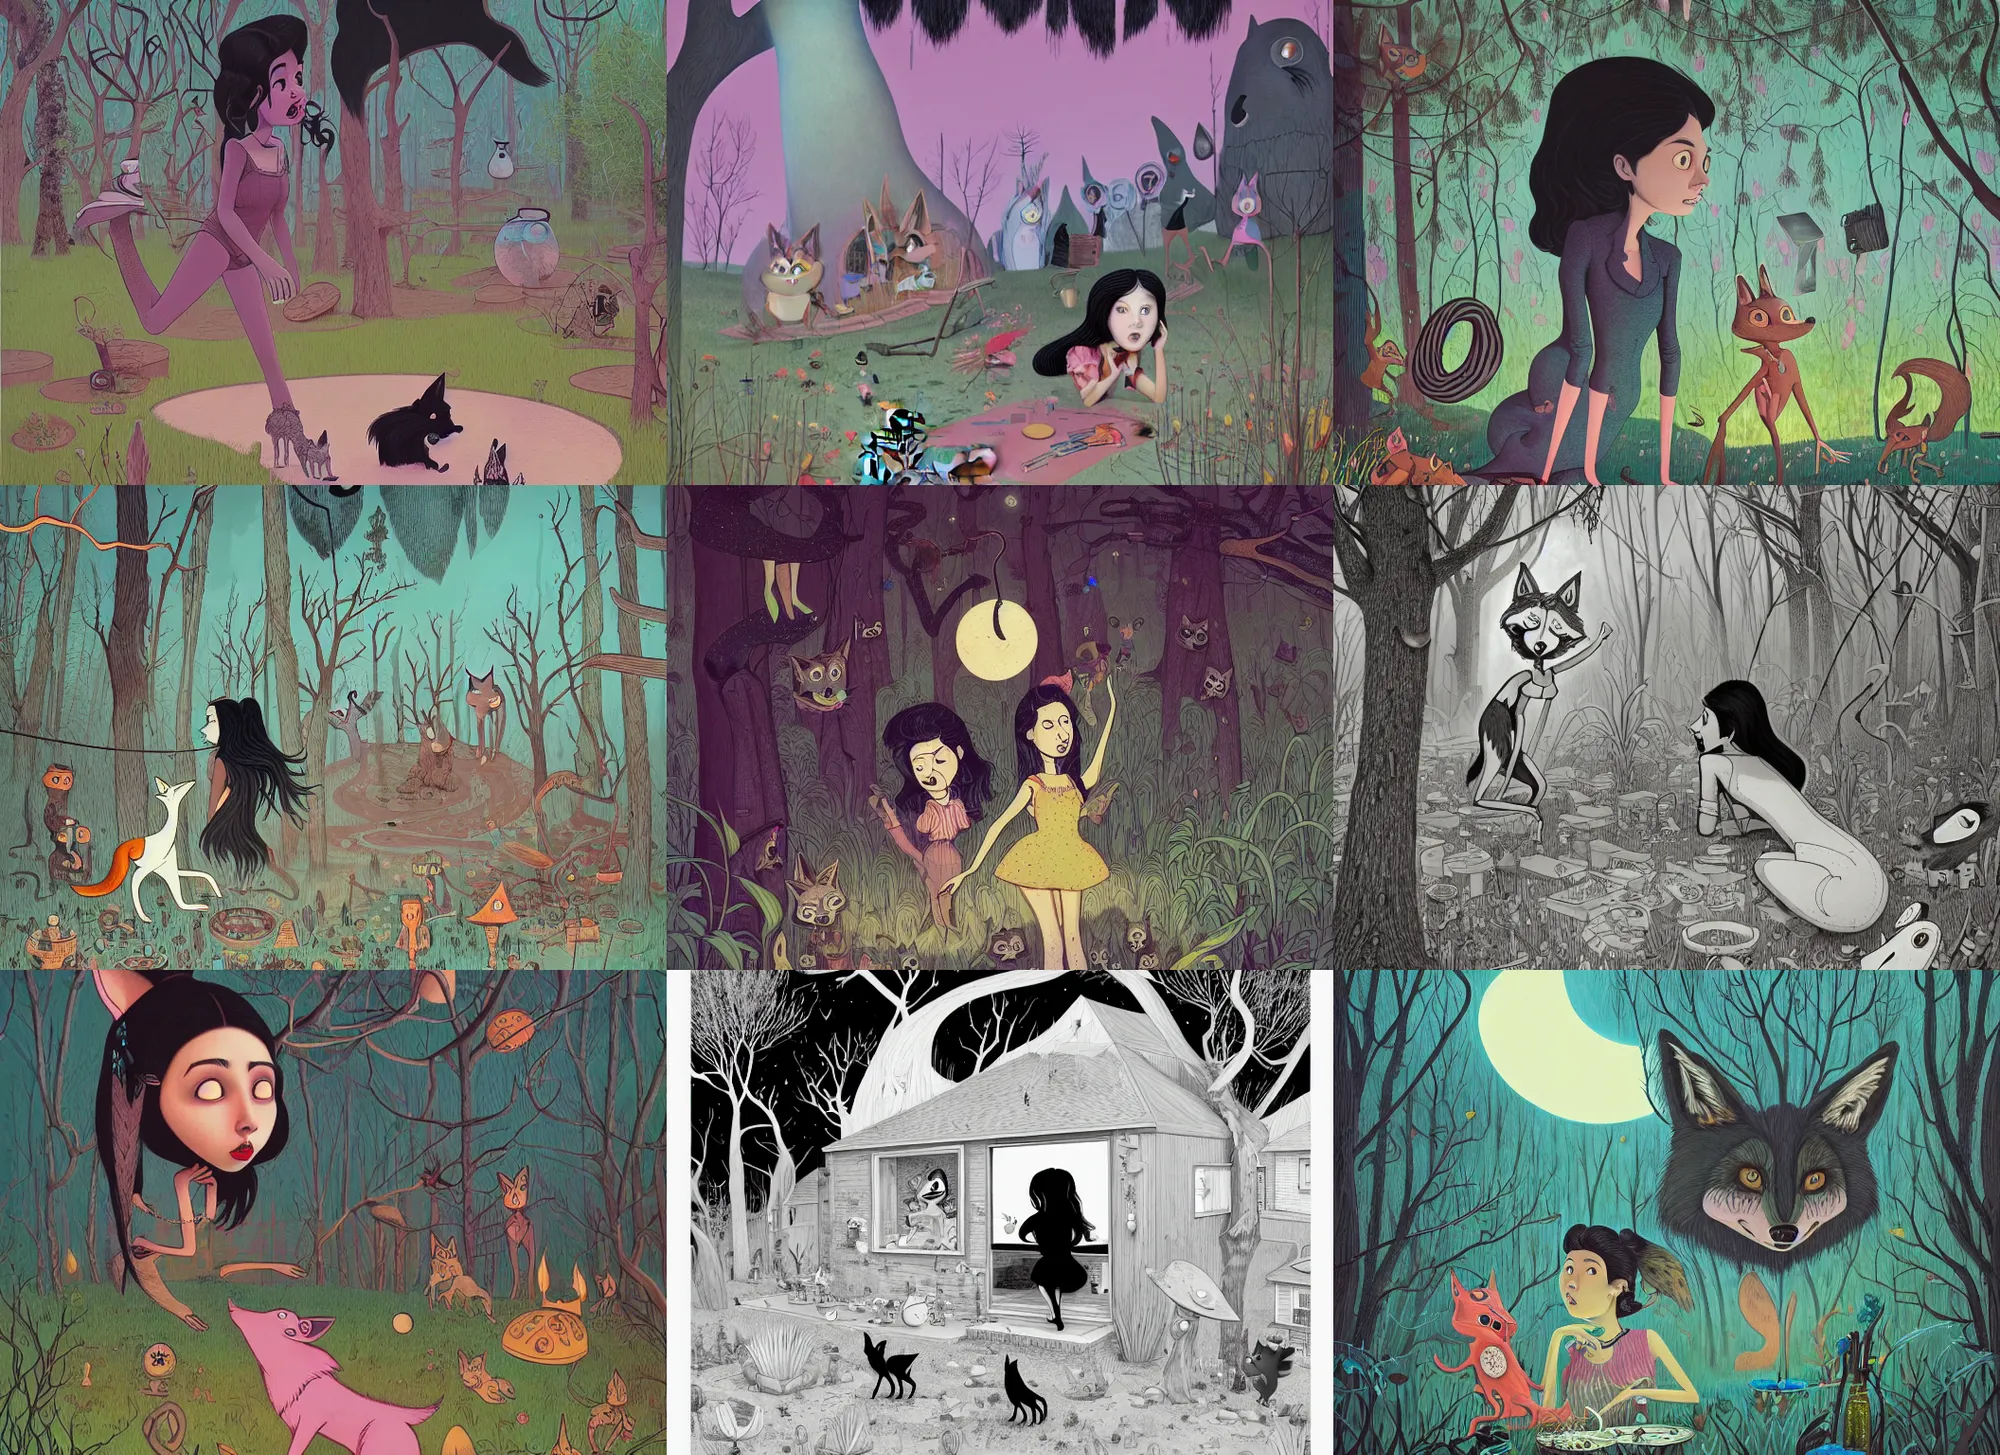 Prompt: a black haired girl hears a magic coyote from another quantum dimension speak while in her backyard. surprise, jon macnair, gary baseman, flat matte art, beautiful line drawing, carles dalmau, pedro correa, jakub rebelka, xiaofan zhang, artstation, intricate and highly detailed, nettie wakefield, monica langlois